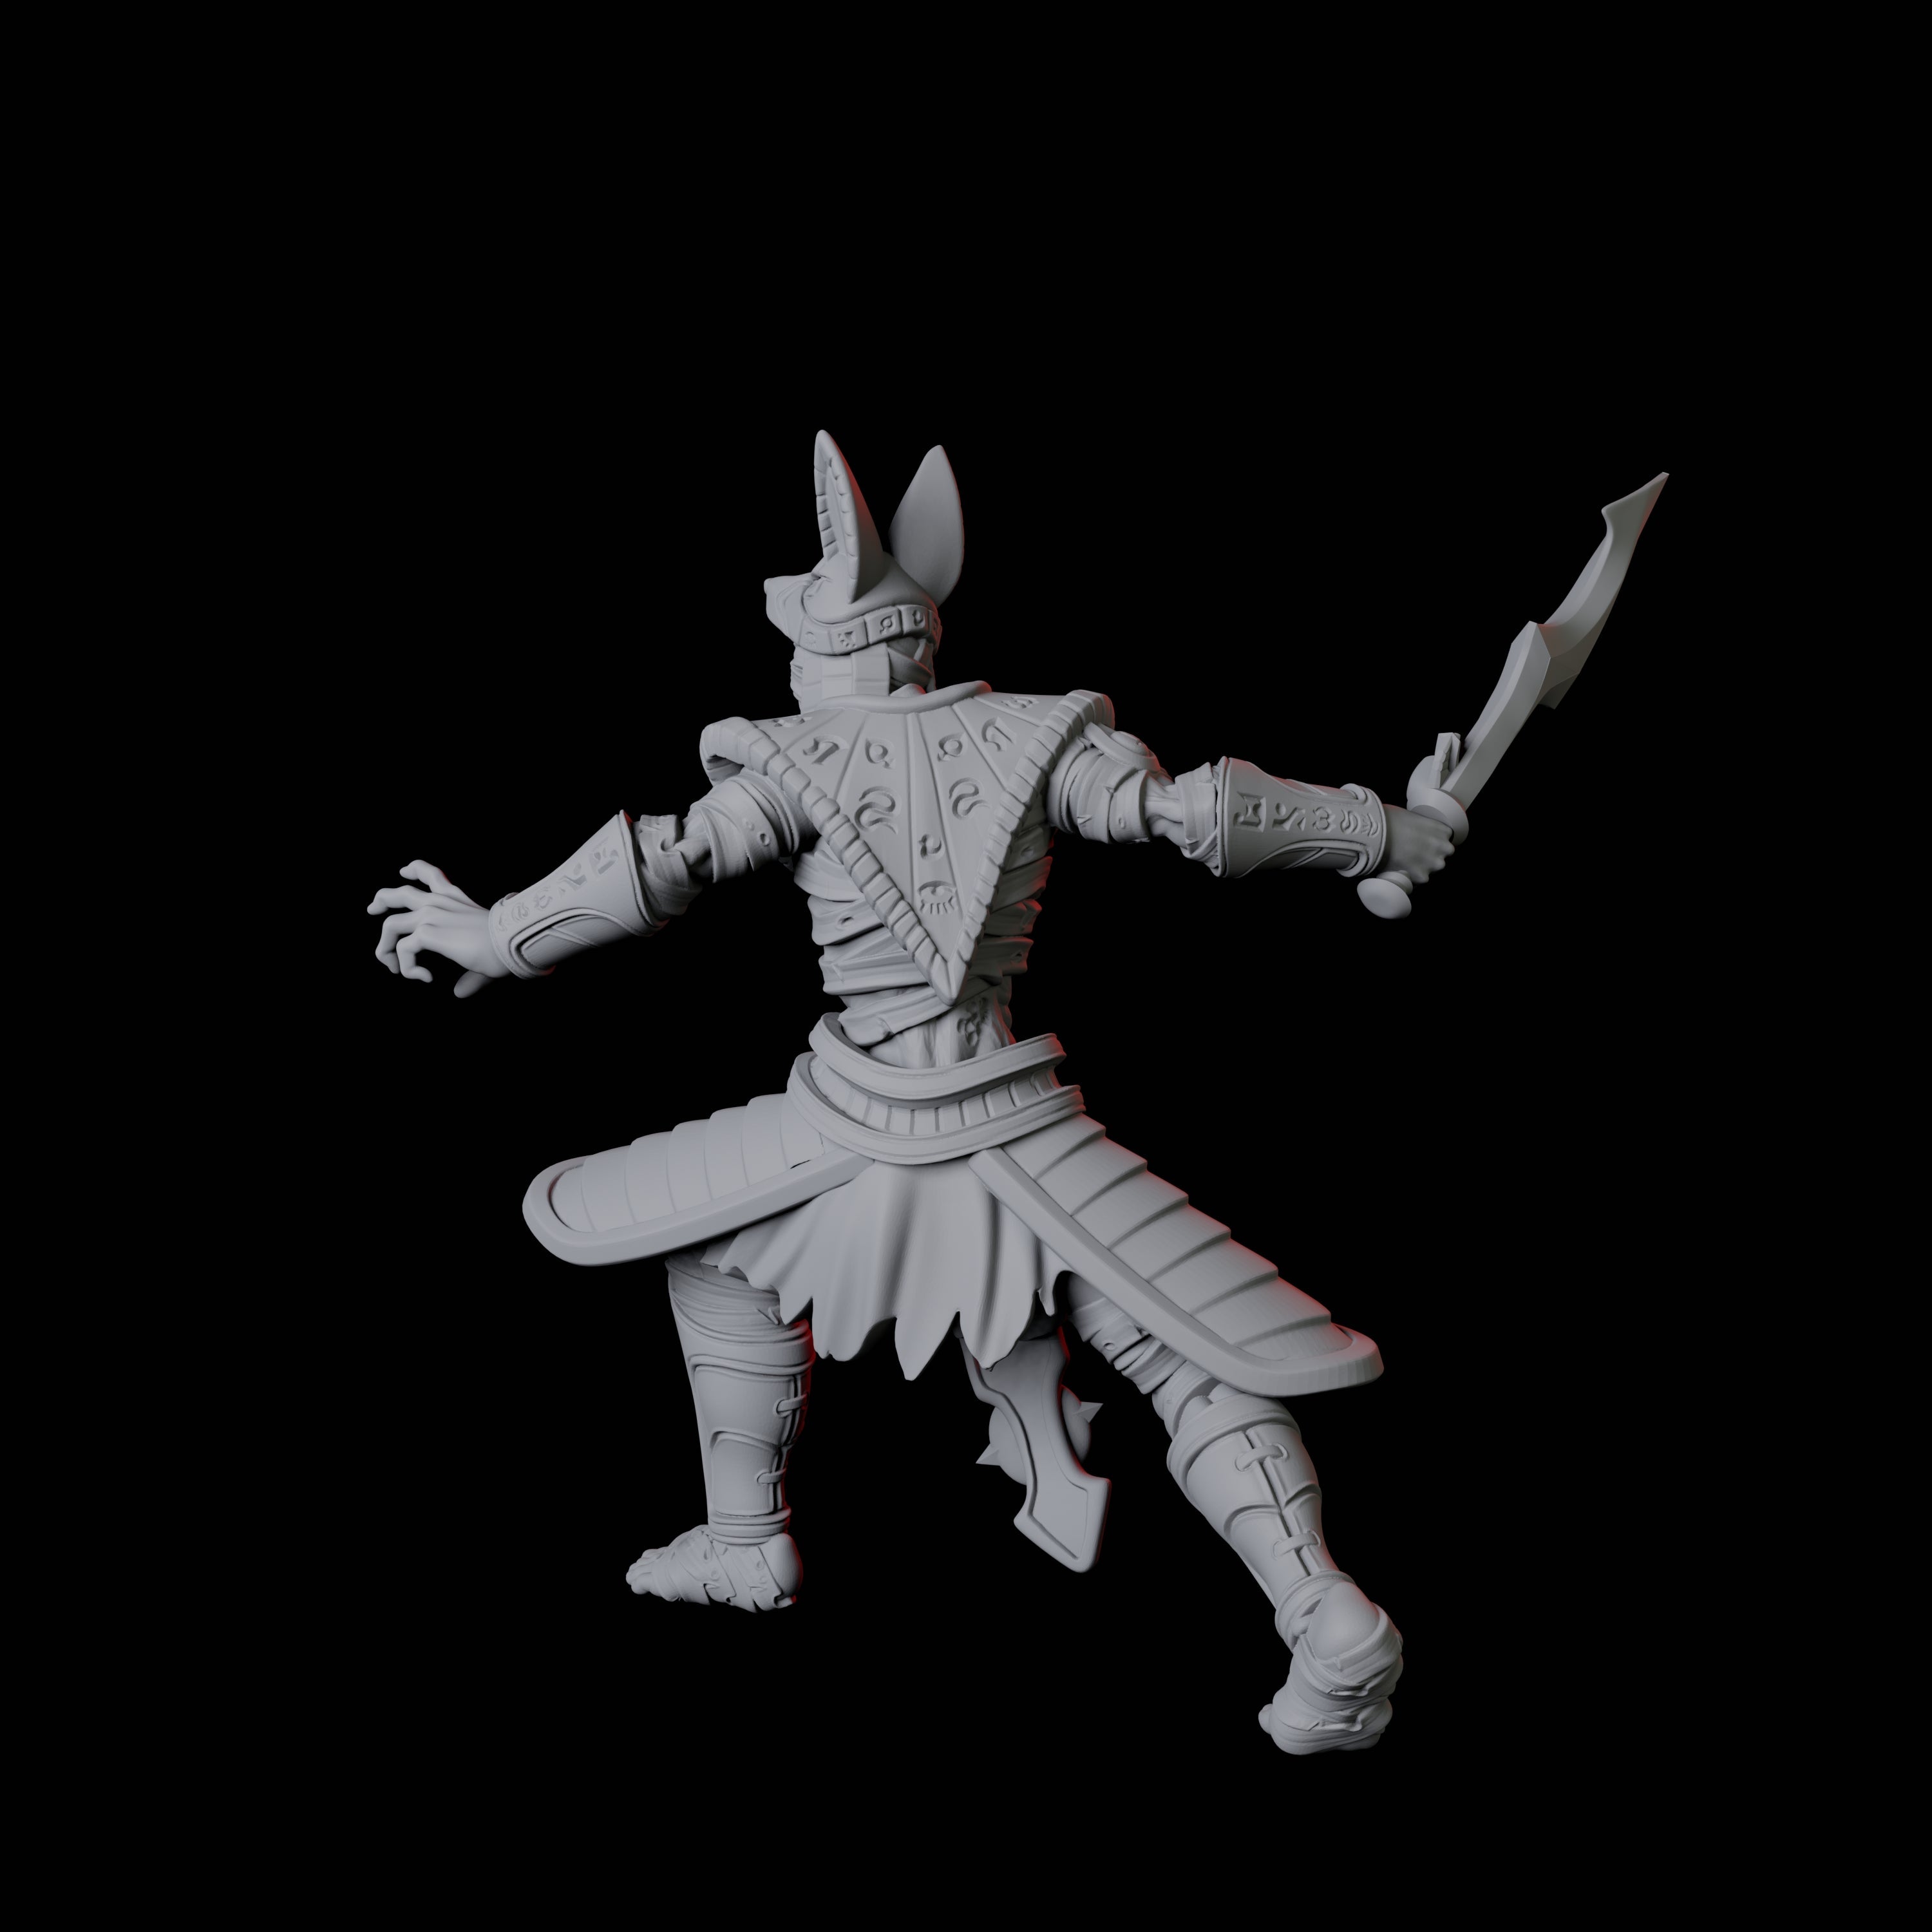 Masked Pharaoh Guard C Miniature for Dungeons and Dragons, Pathfinder or other TTRPGs